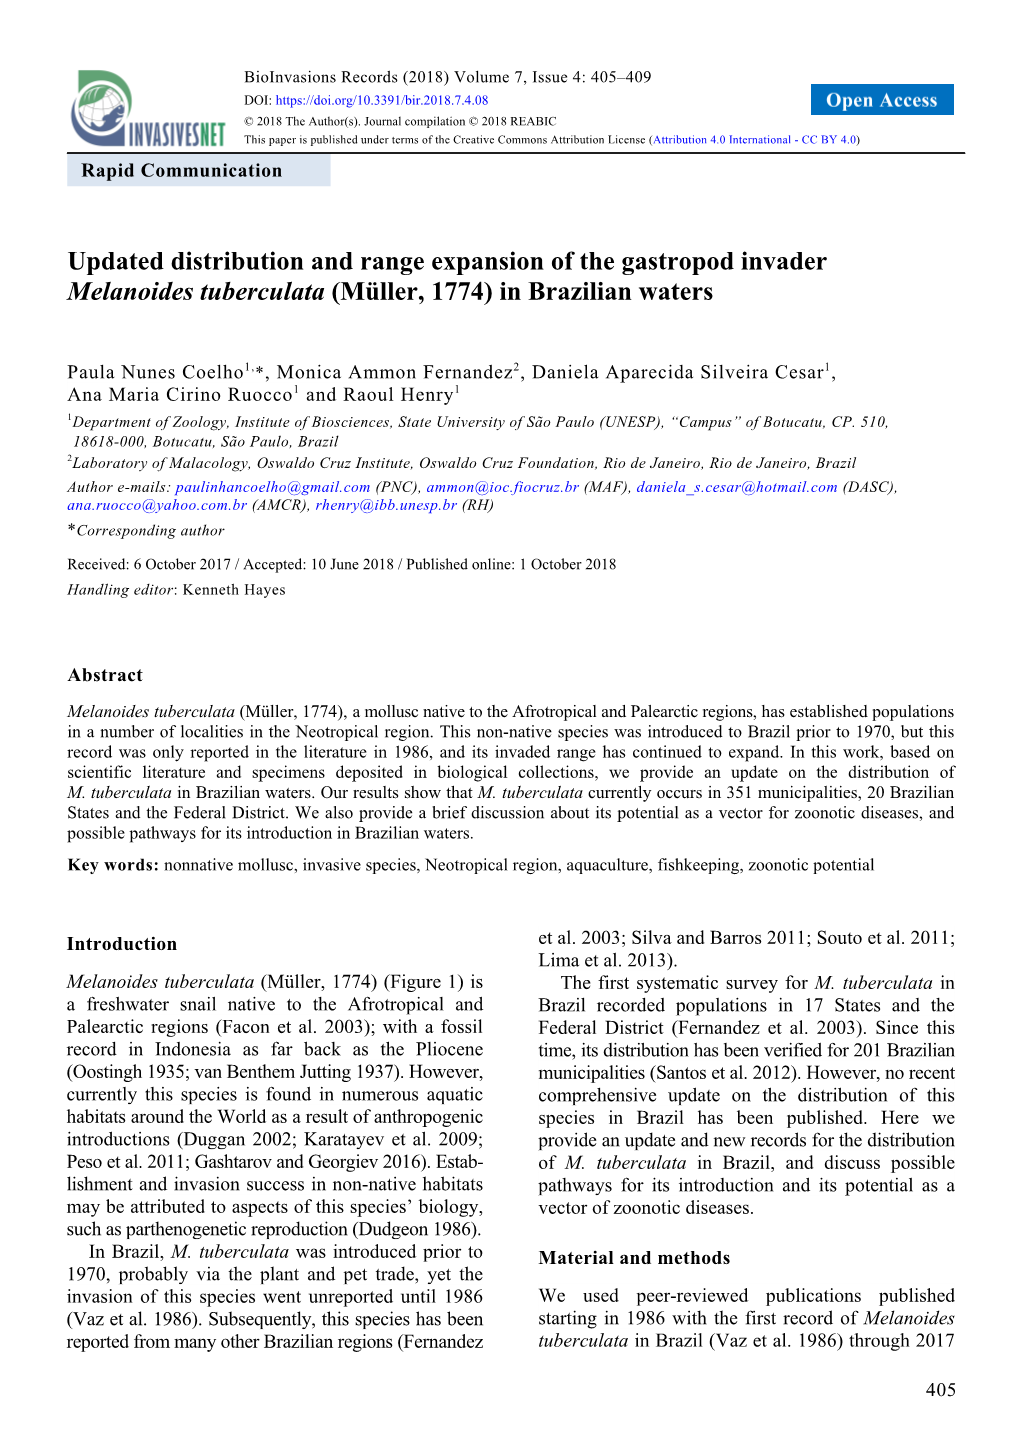 Updated Distribution and Range Expansion of the Gastropod Invader Melanoides Tuberculata (Müller, 1774) in Brazilian Waters